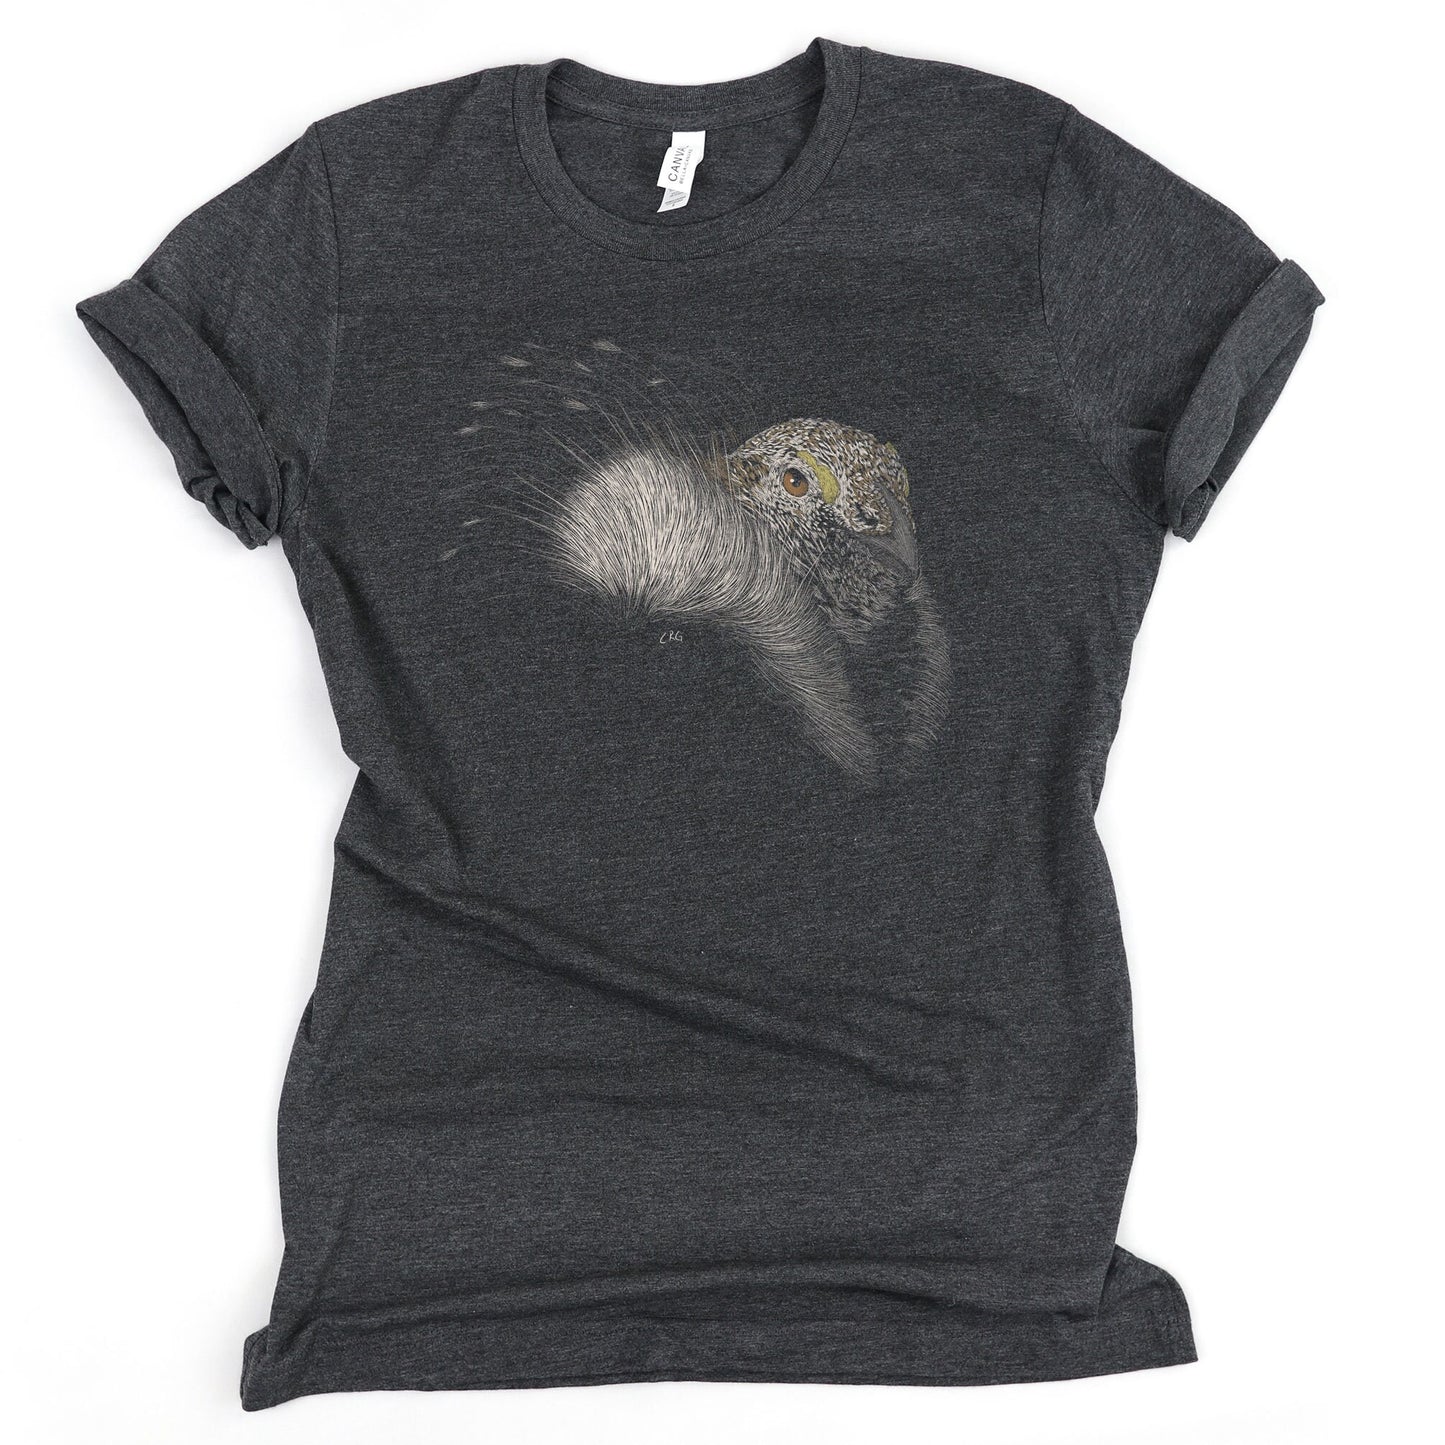 Greater Sage Grouse Shirt